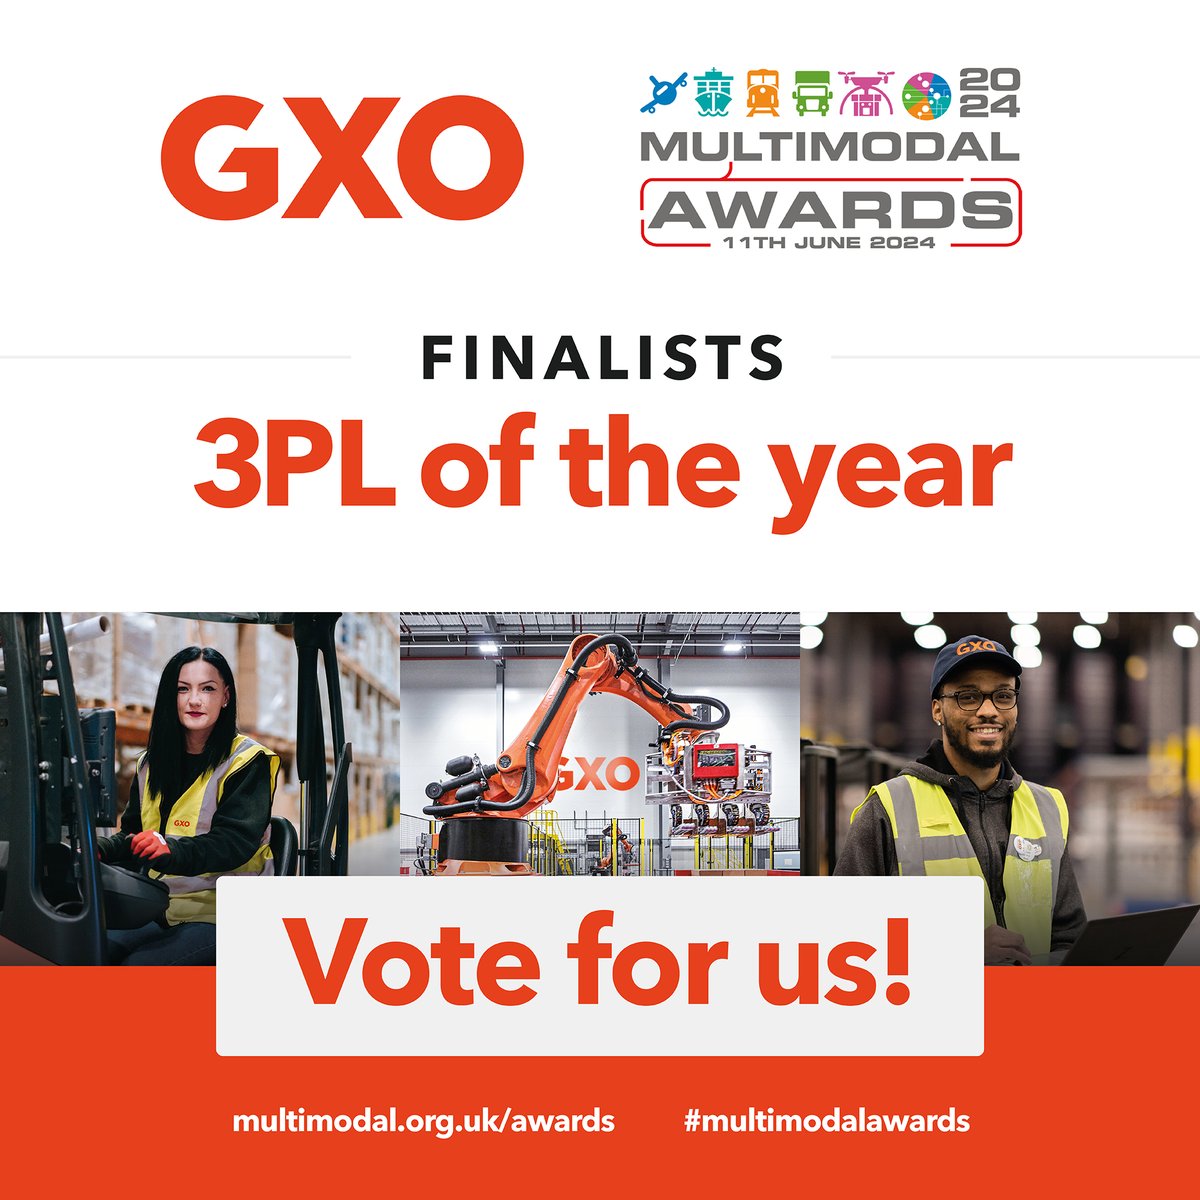 Voting is now open for the #MultimodalAwards! GXO's up for 3PL of the Year, but us #GameChangers aren't allowed to vote — it's in the hands of the wider community. There are some fantastic organizations represented, so go make your voice heard: multimodal.org.uk/awards/finalis…… 🗳️